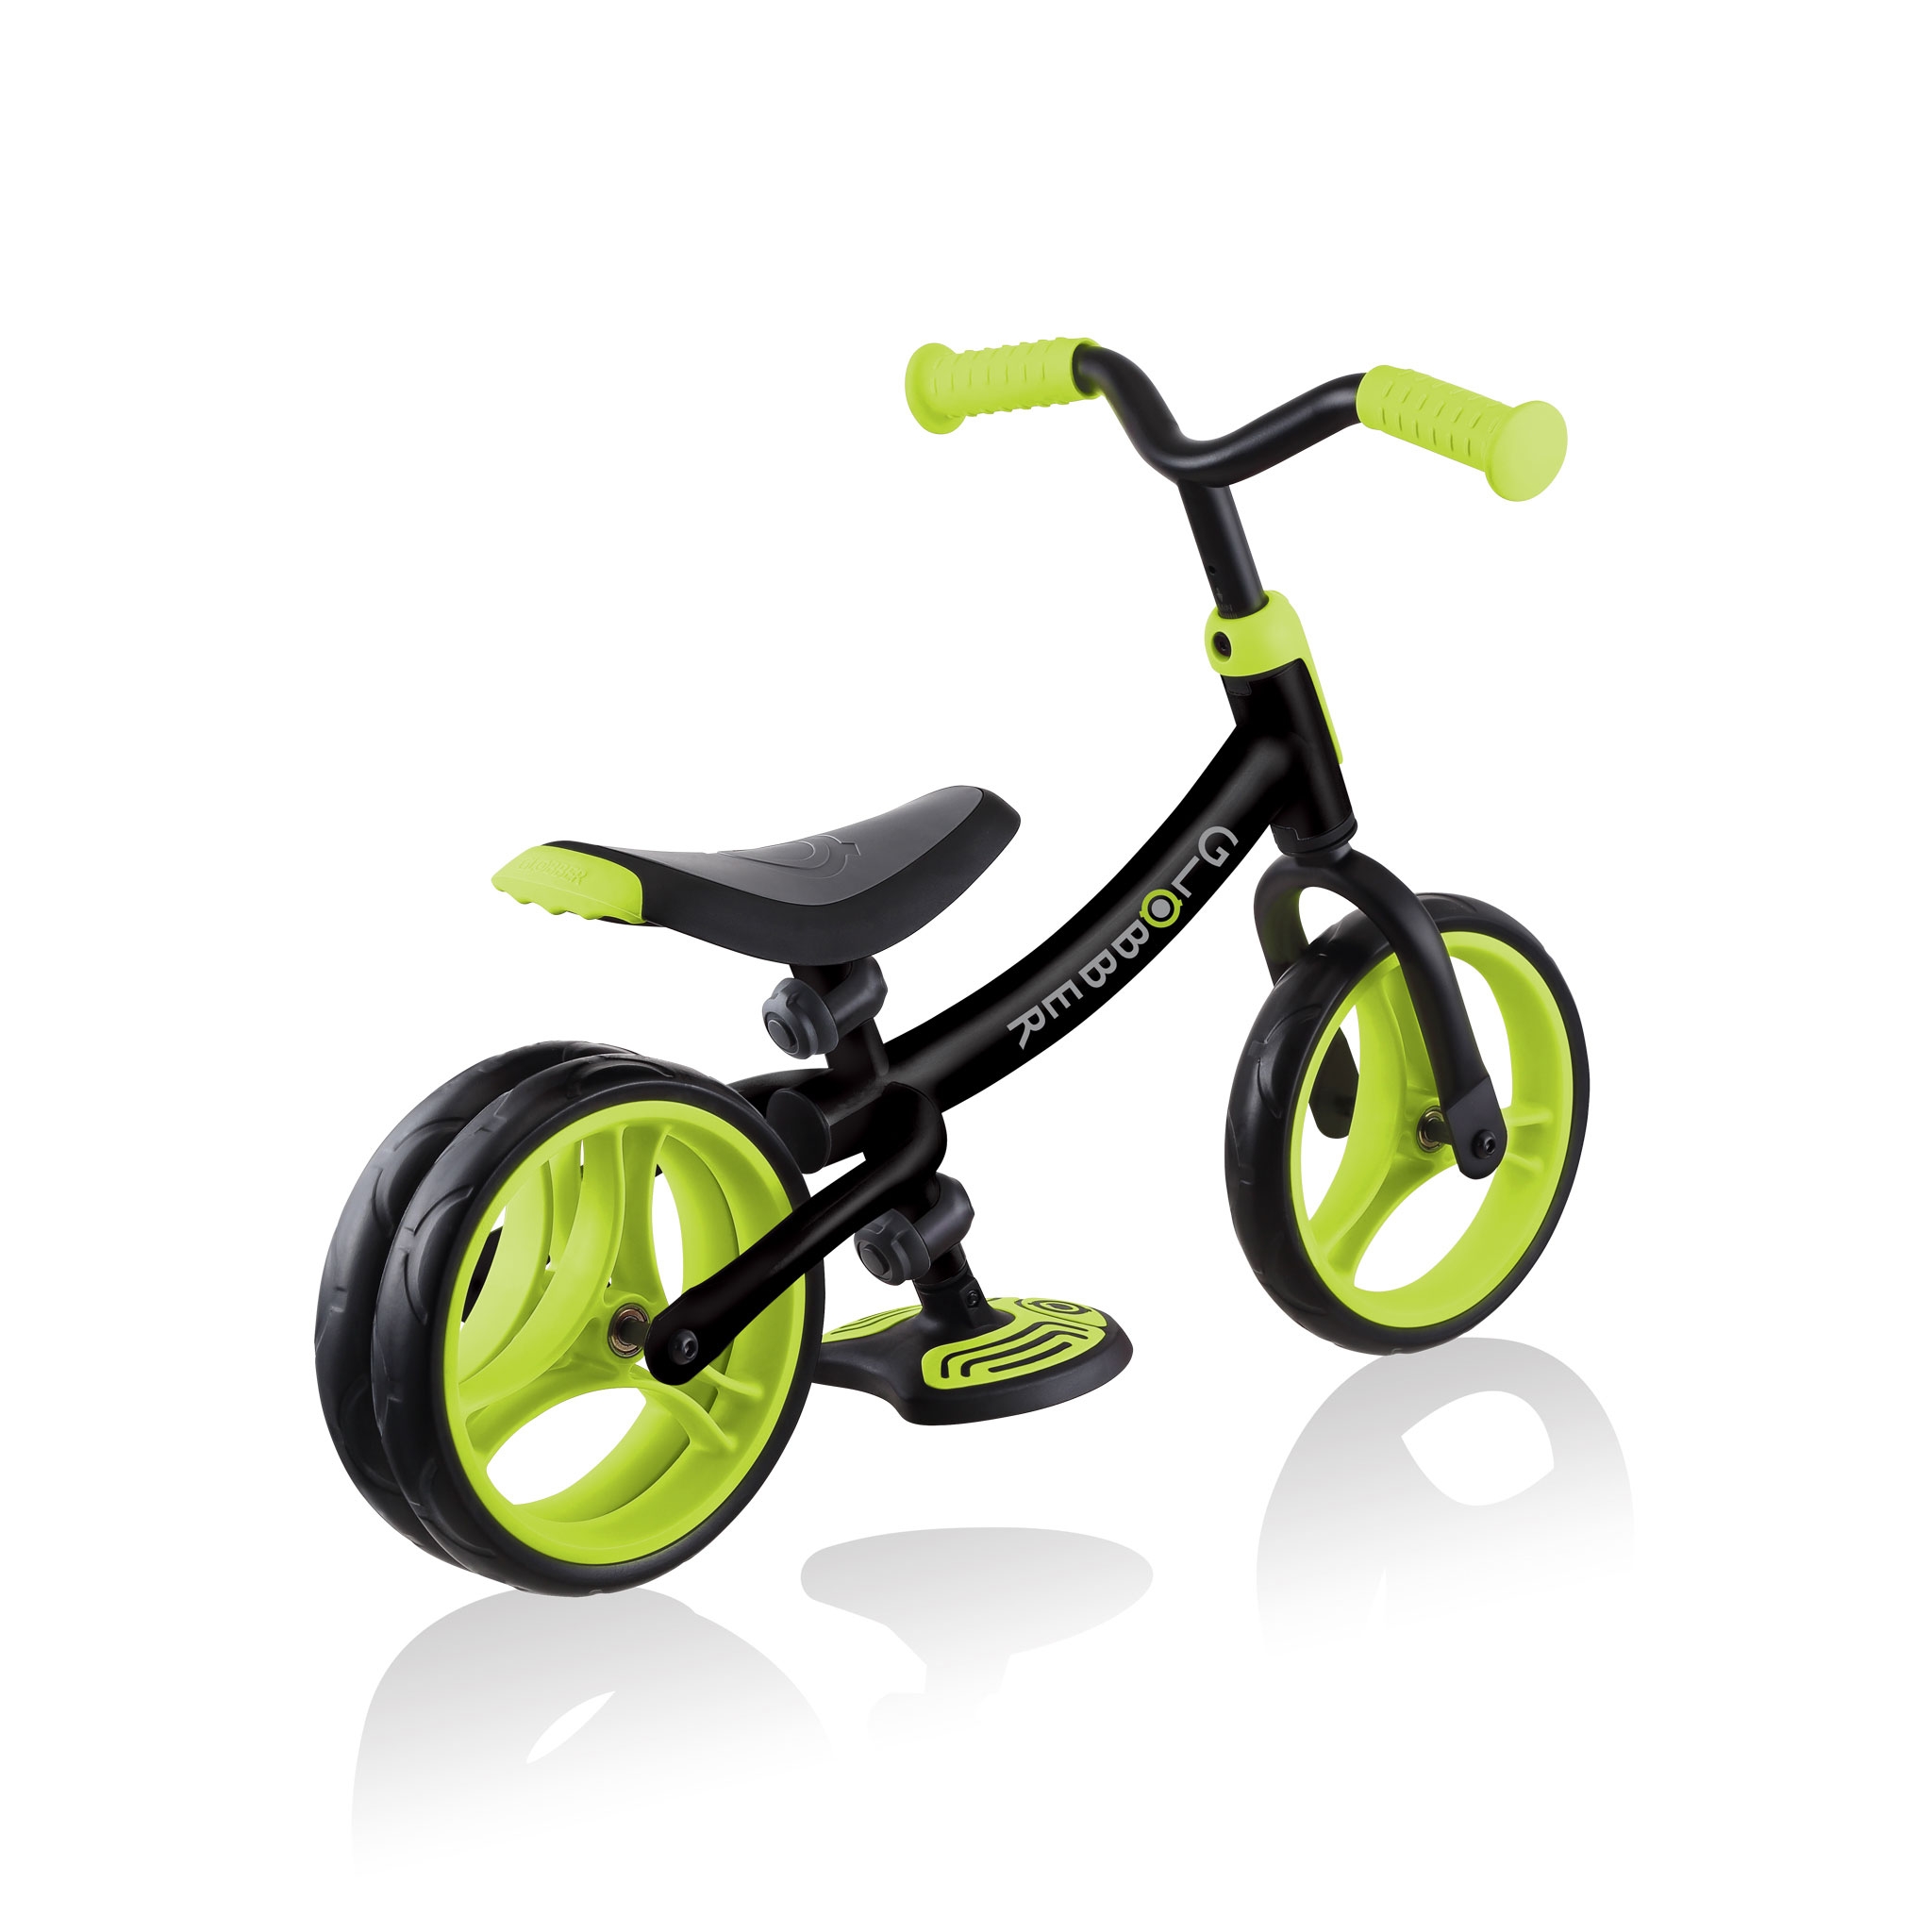 YBIKE 2 in 1 Draisienne, Fonction Double Usage Velo Enfant